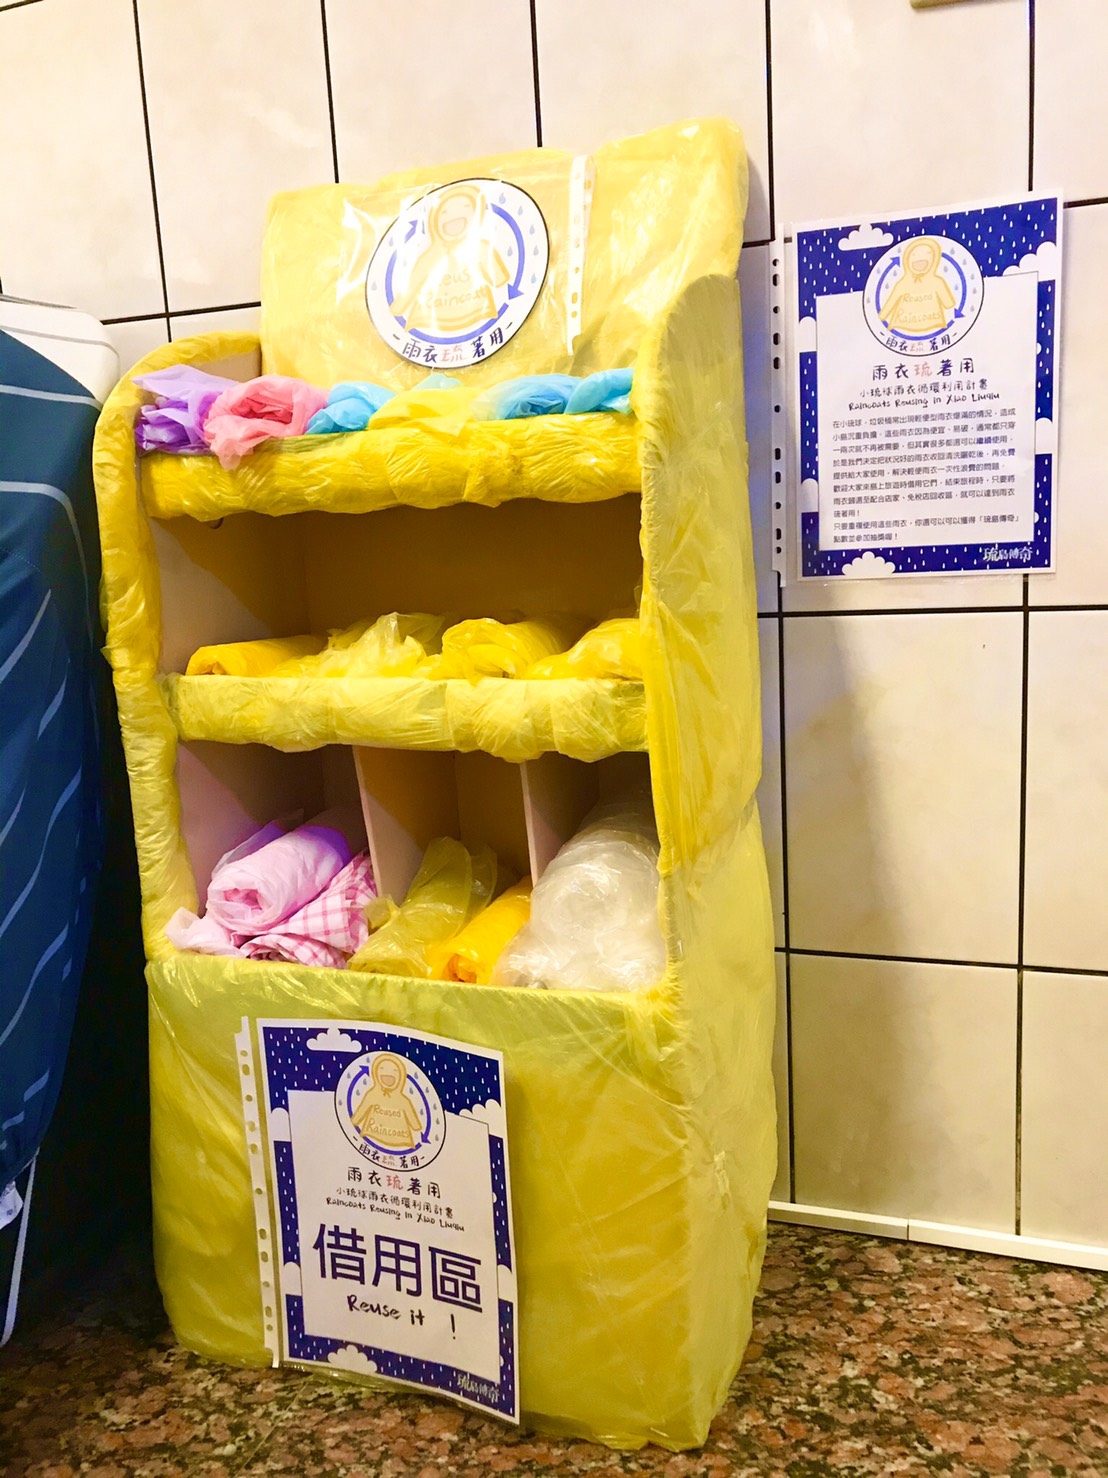 The “Reusable Raincoats in Little Liuqiu” racks are adapted from idled racks for displaying goods at convenience stores. Since these are paper racks, the organizer wrapped them up with a disposable raincoat, so that they won’t be damaged on rainy days.  (Photo credit: Chen Hung-chun)